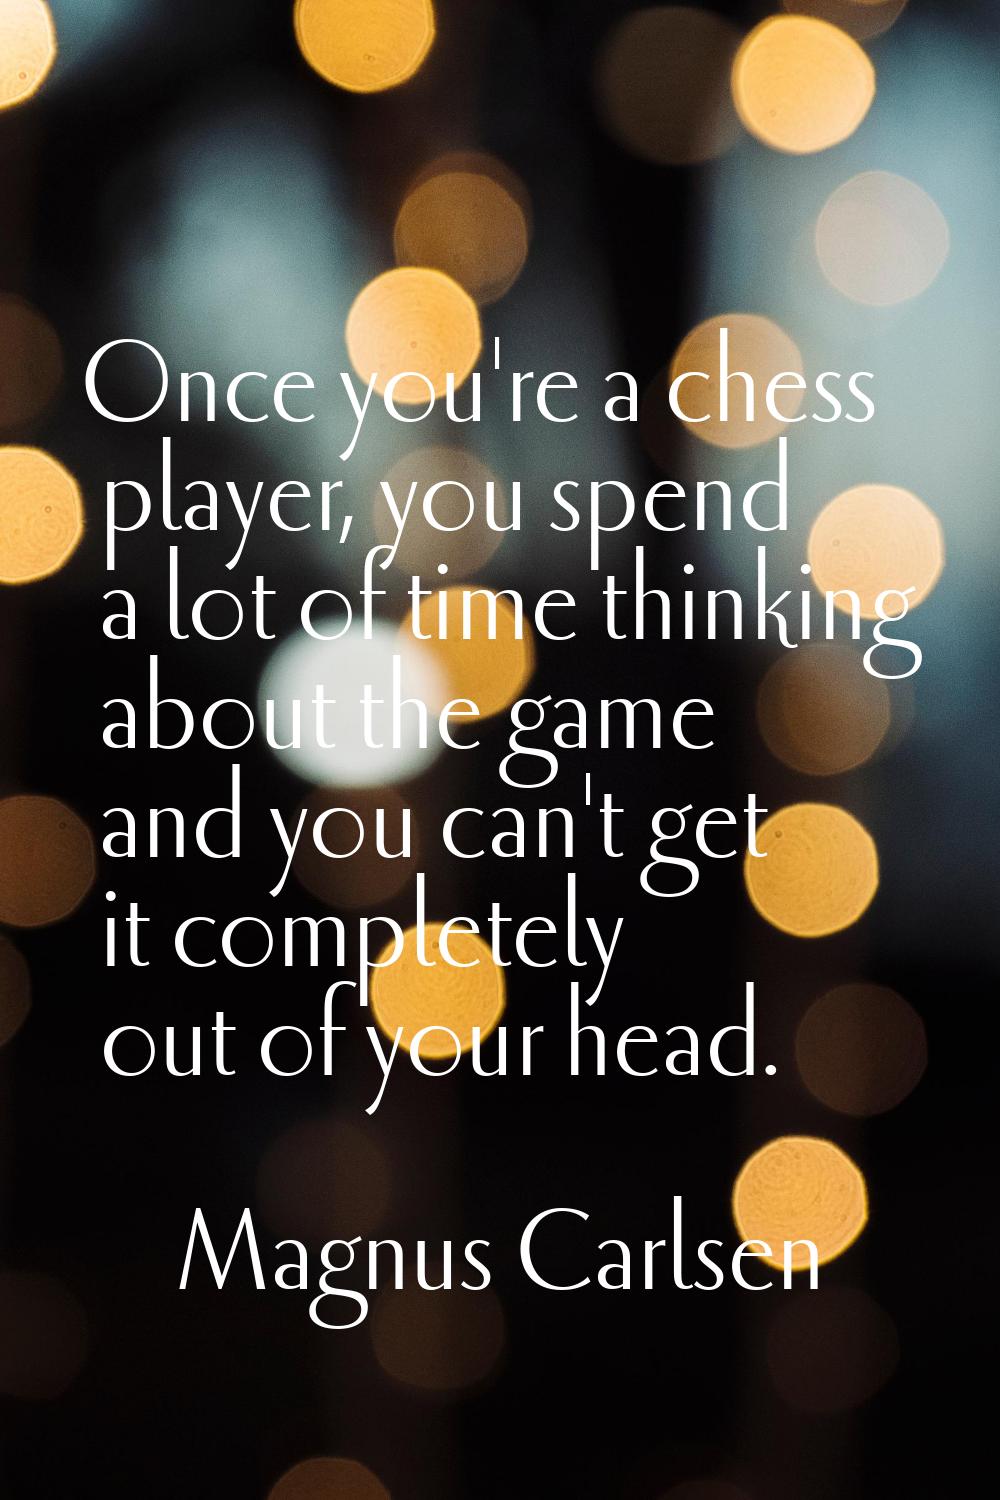 Once you're a chess player, you spend a lot of time thinking about the game and you can't get it co